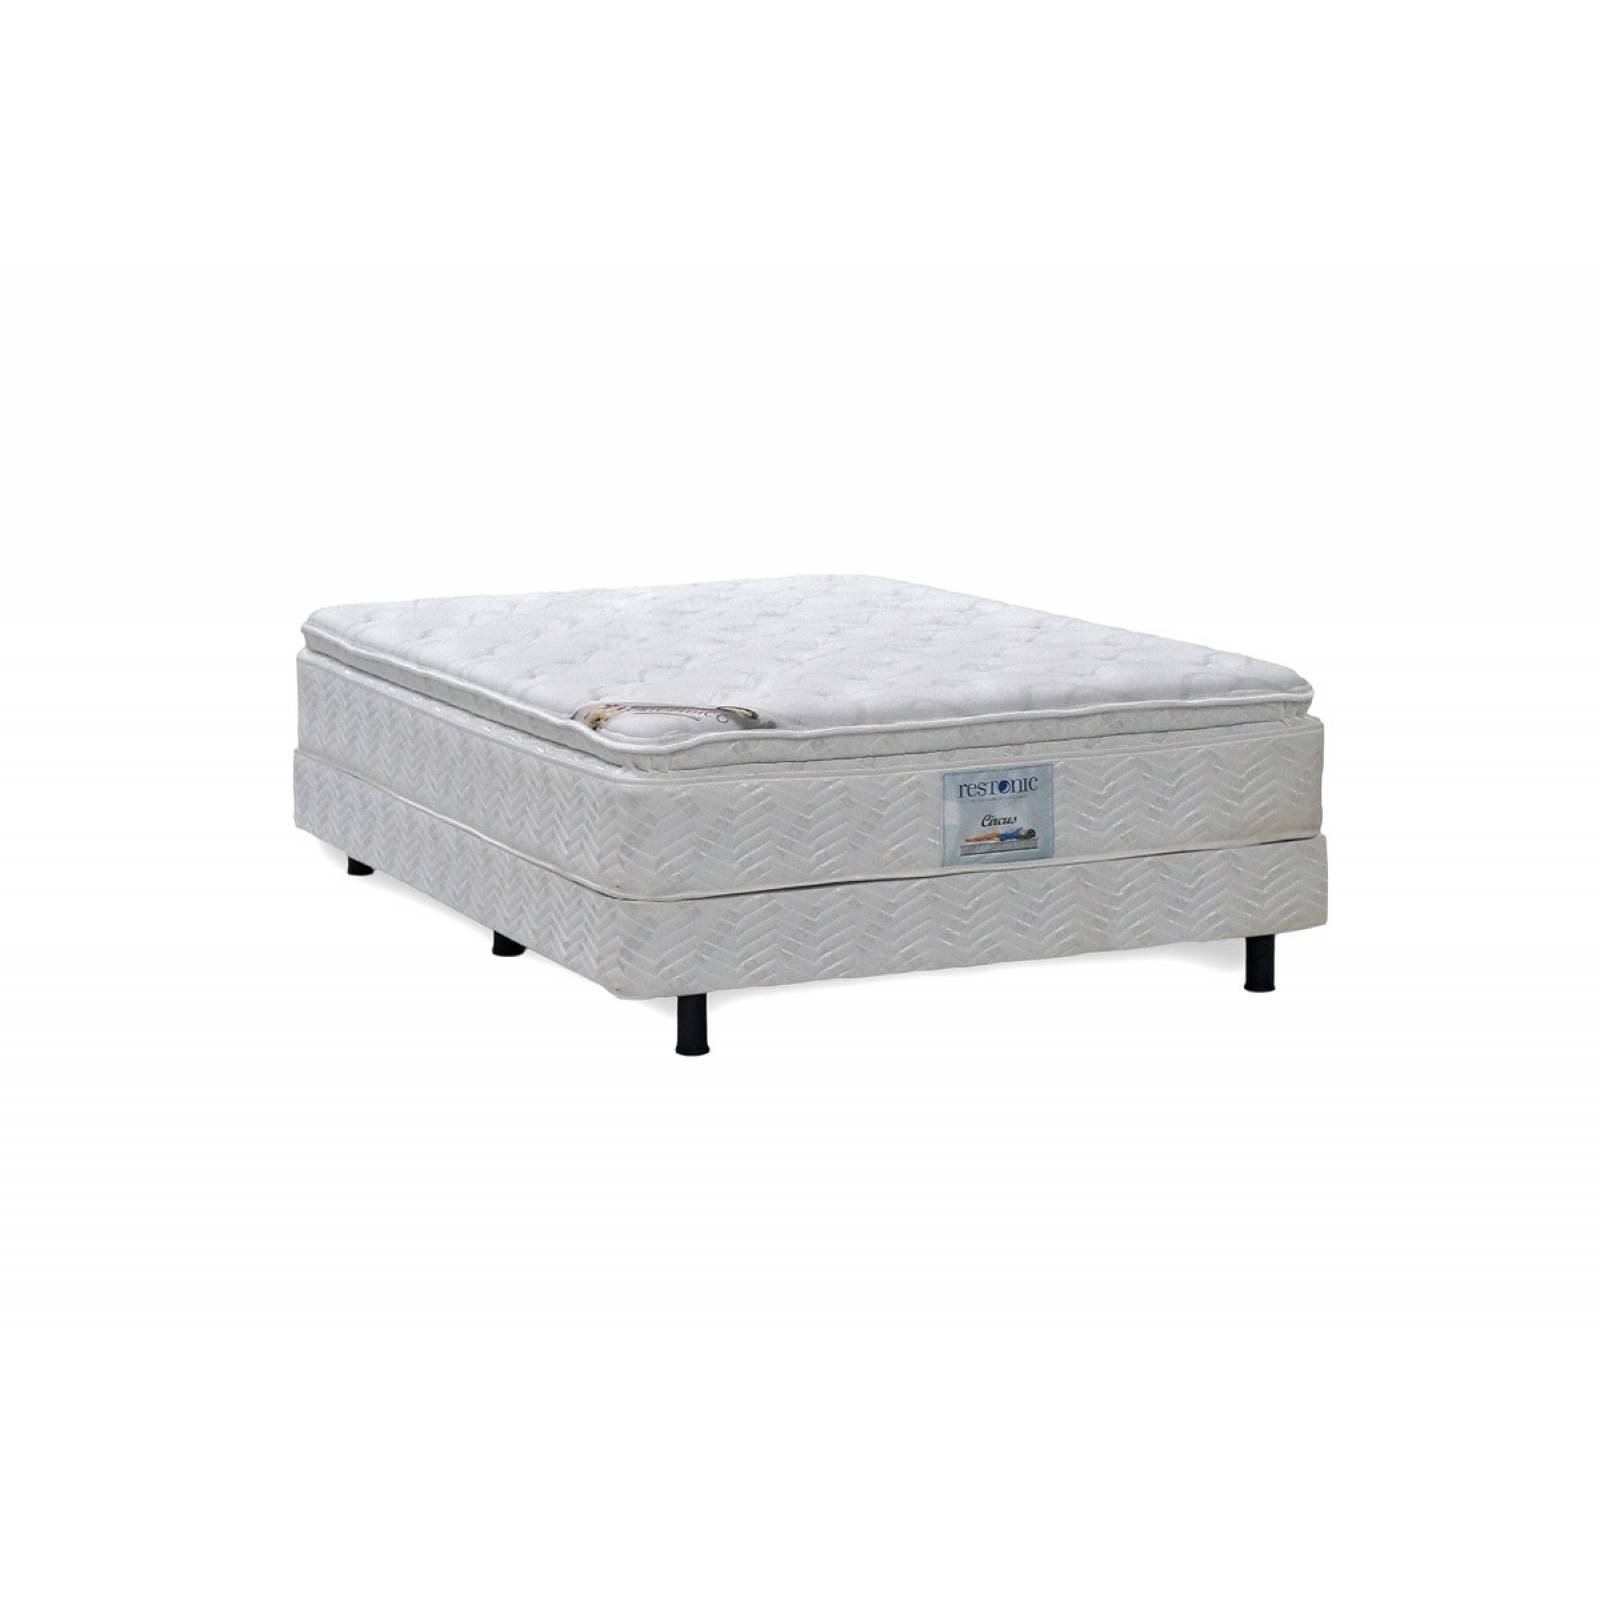 COLCHON CIRCUS RESTONIC QUEEN SIZE